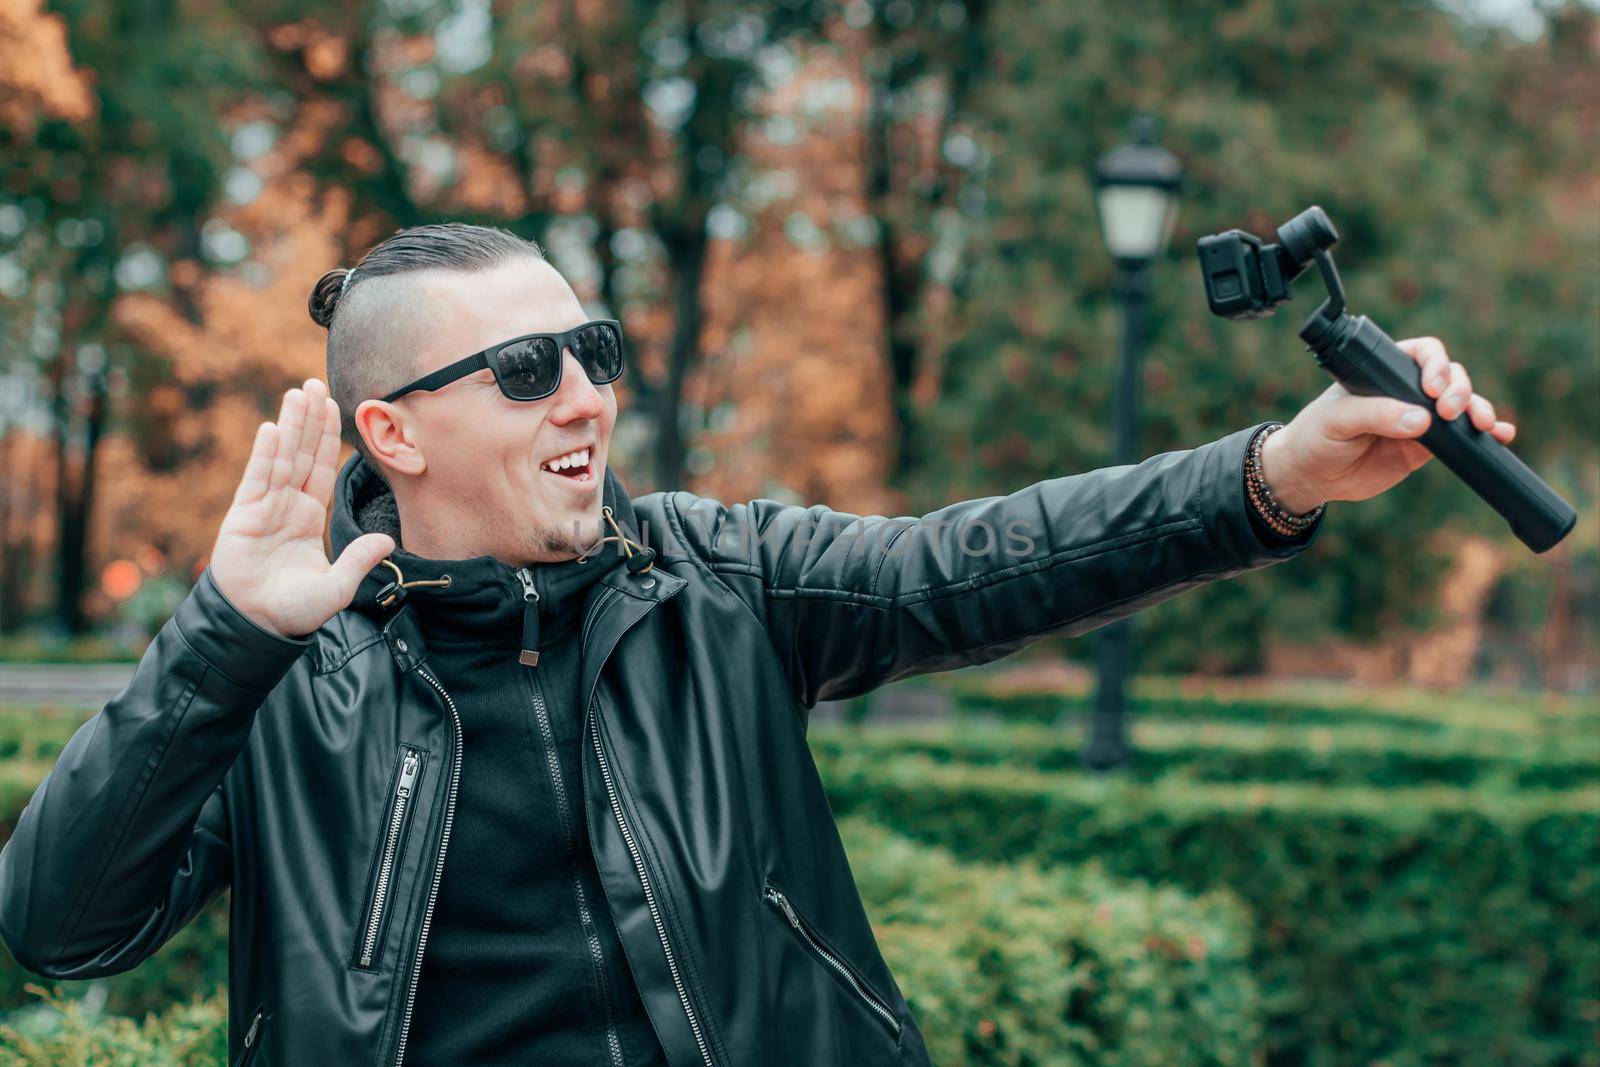 Blogger in Sunglasses Making Selfie or Streaming Video at the Autumn Park Using Action Camera with Gimbal Camera Stabilizer. Handsome Man in Black Clothes Making Photo